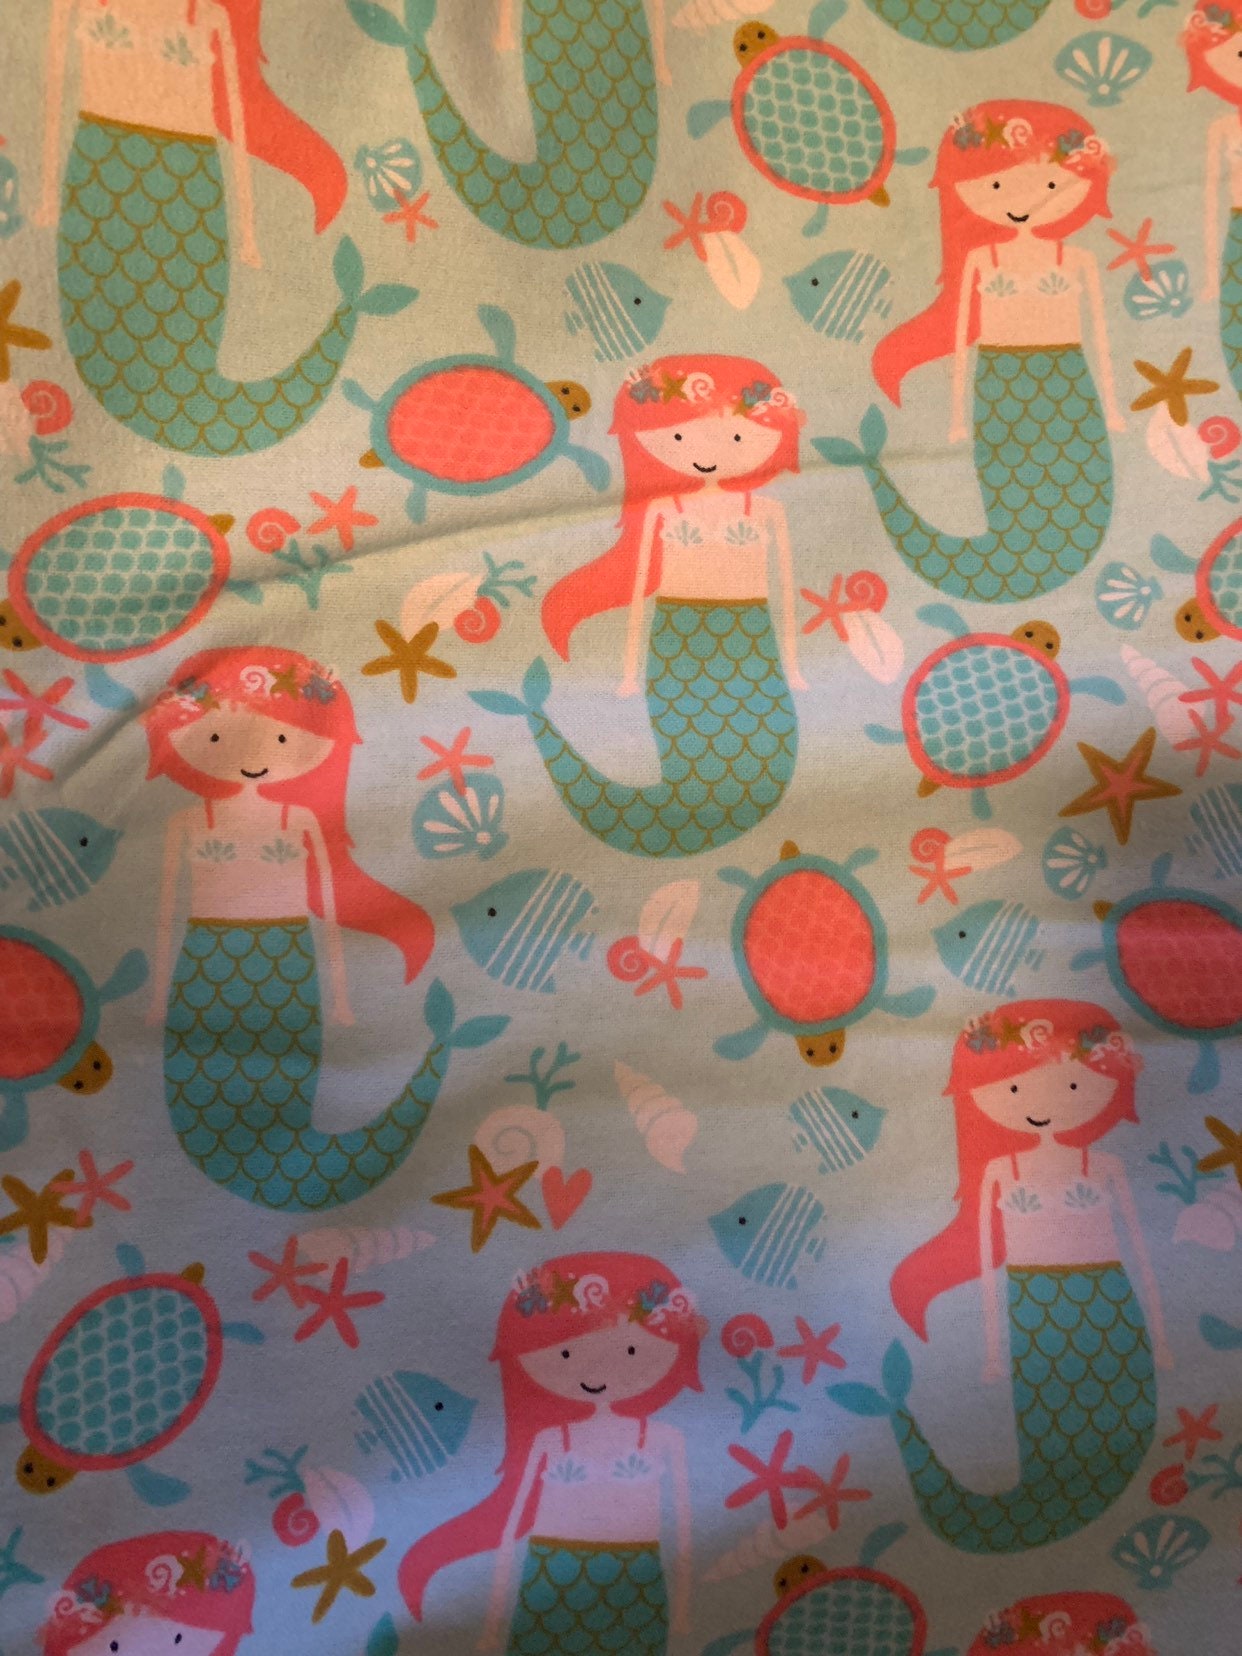 Child Weighted therapy blanket in mermaids with 5 lbs or 10 lbs, lap or